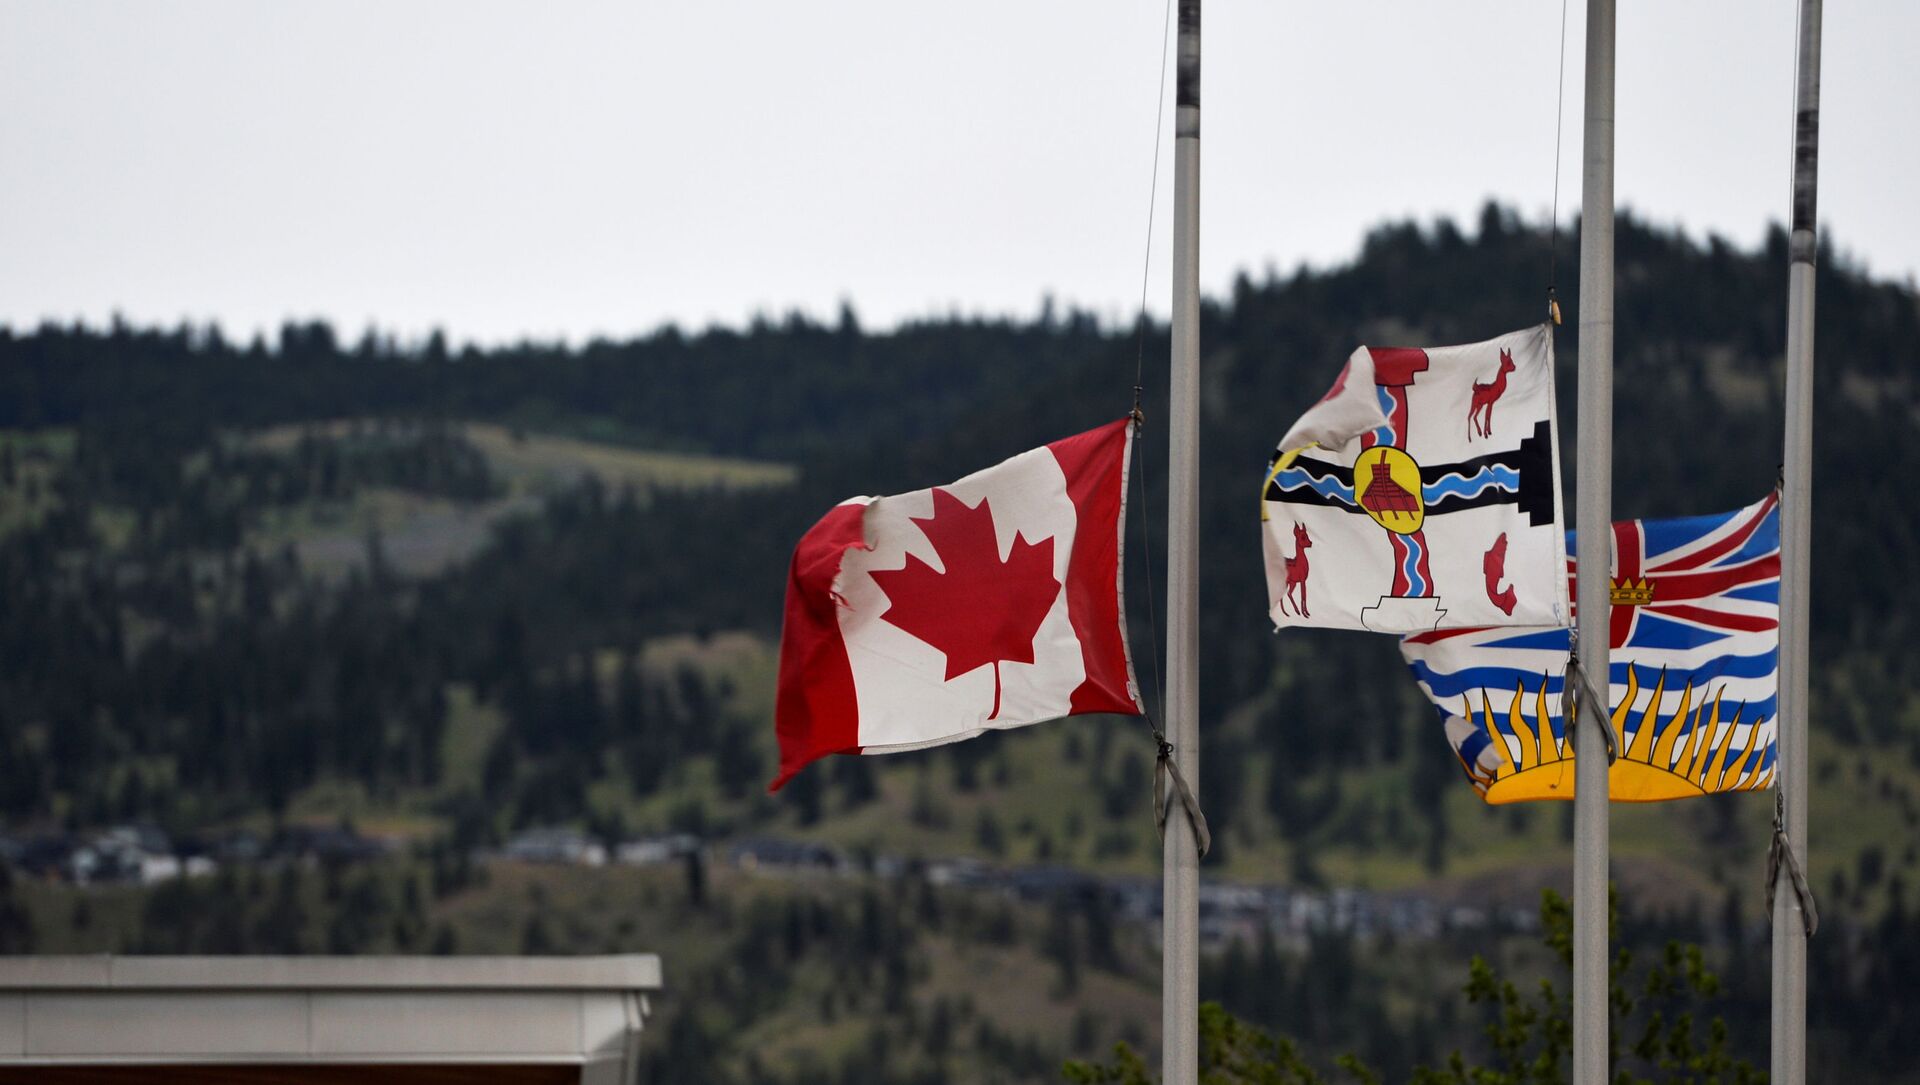 The Canadian flag flies at half-mast near the grounds of the former Kamloops Indian Residential School. - Sputnik International, 1920, 09.06.2021